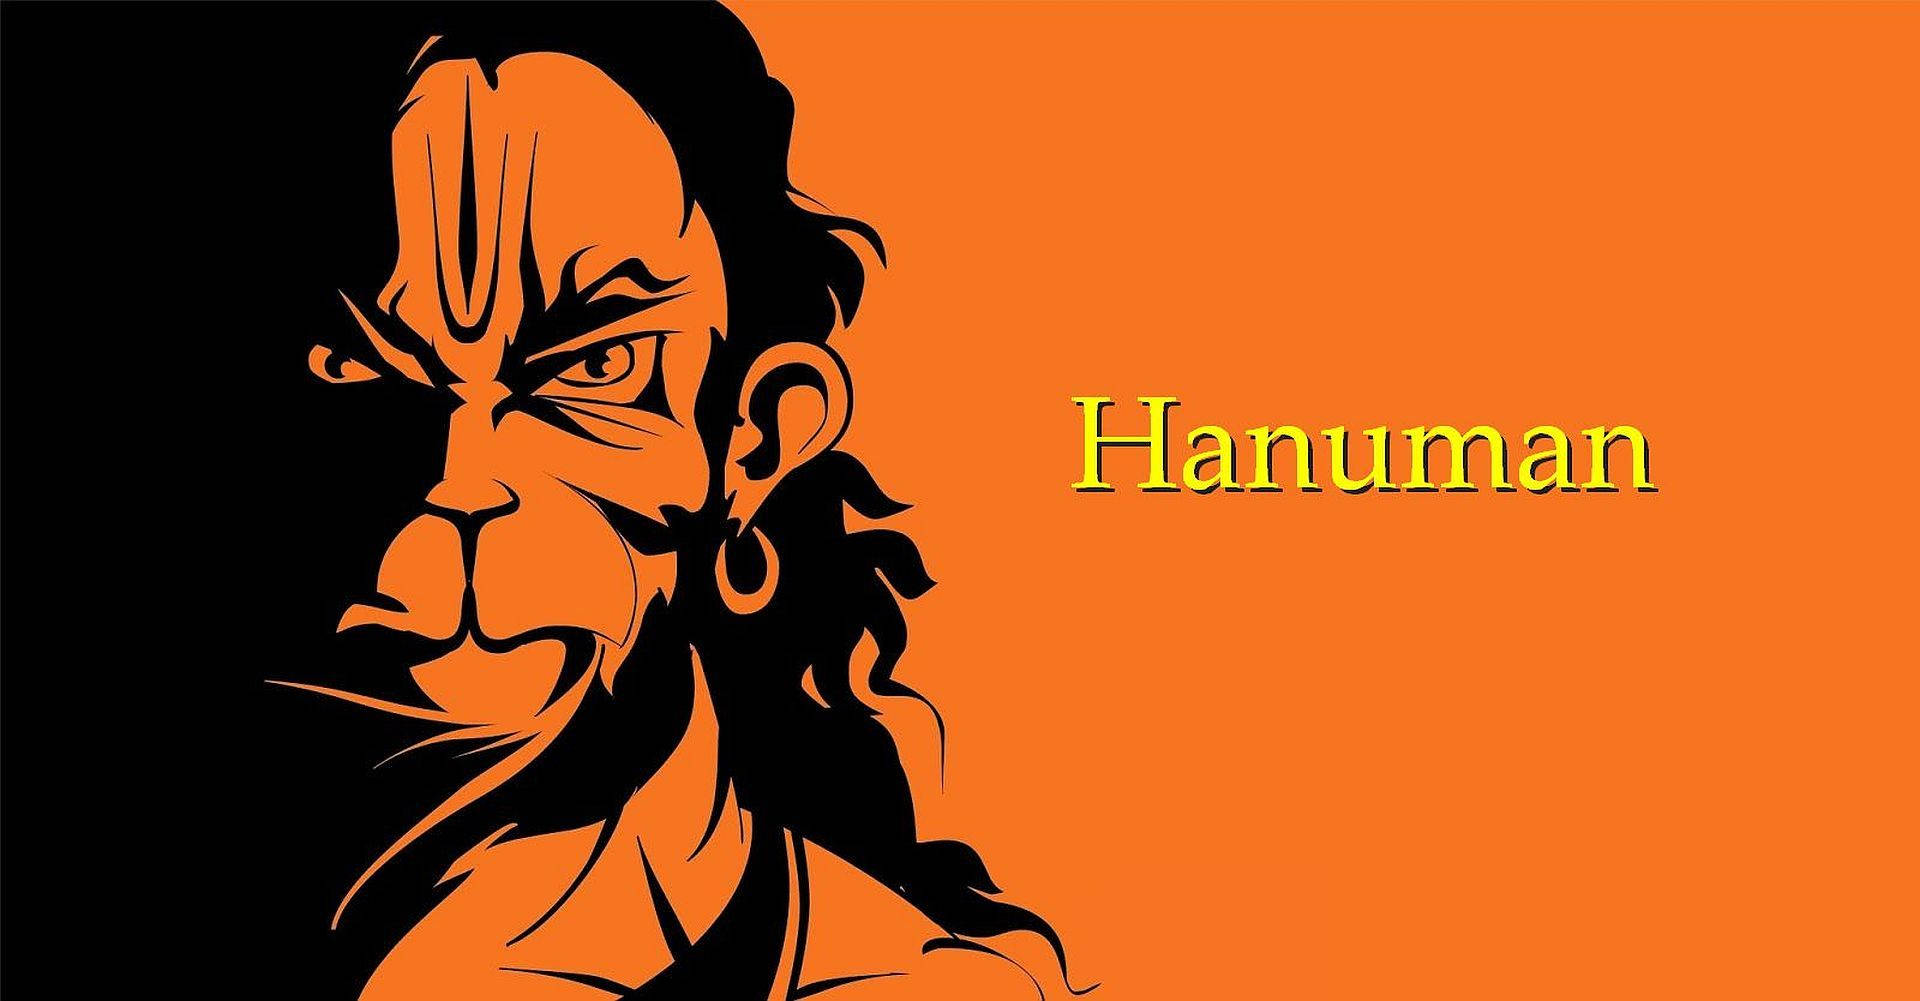 Angry Hanuman Face Graphic Art Background